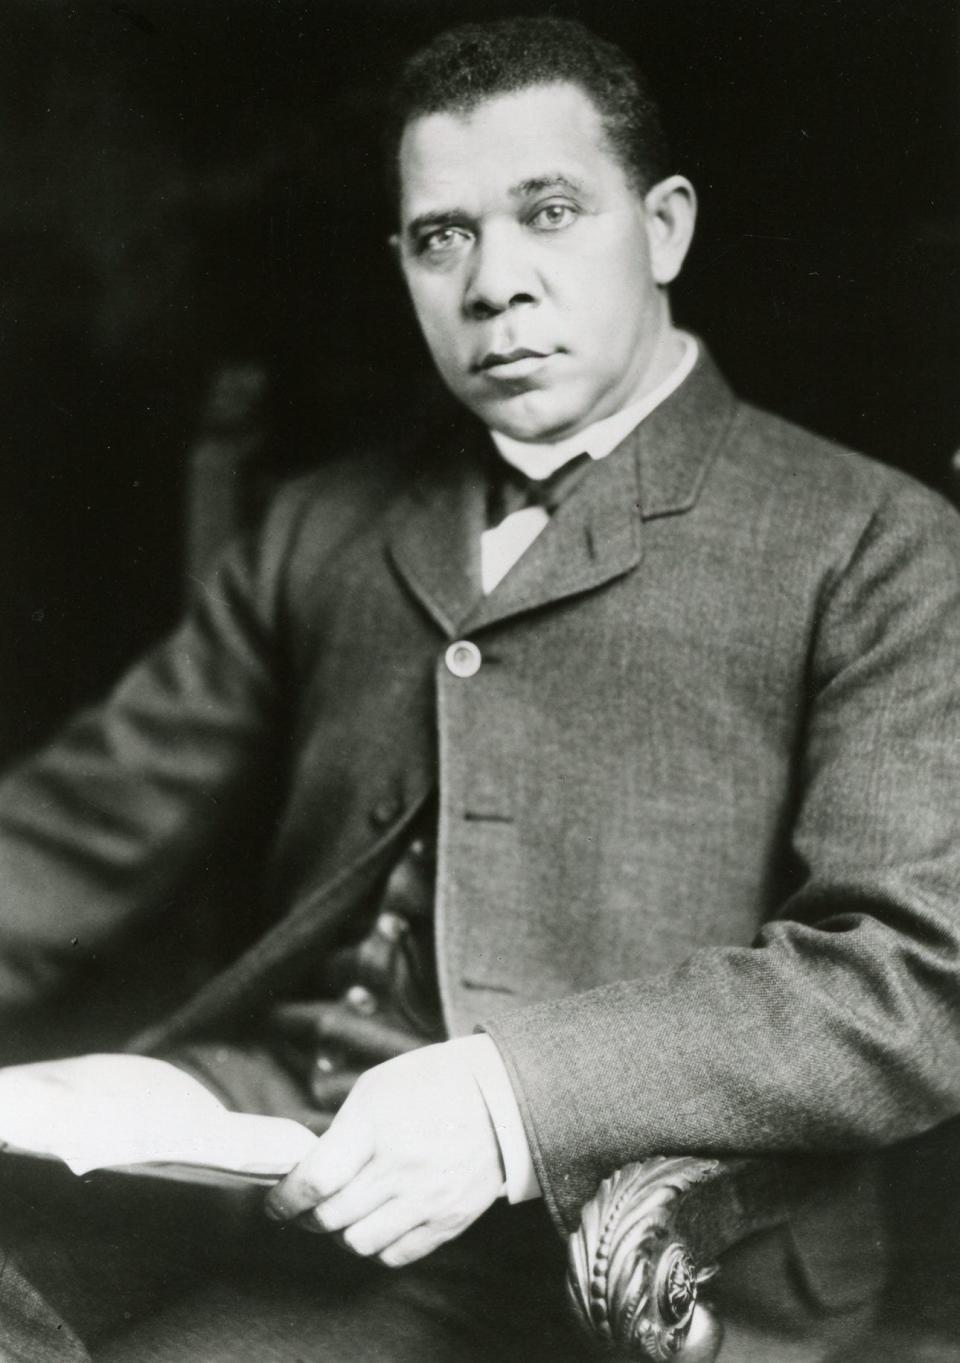 Educator, orator and author Booker T. Washington visited Akron in September 1909.